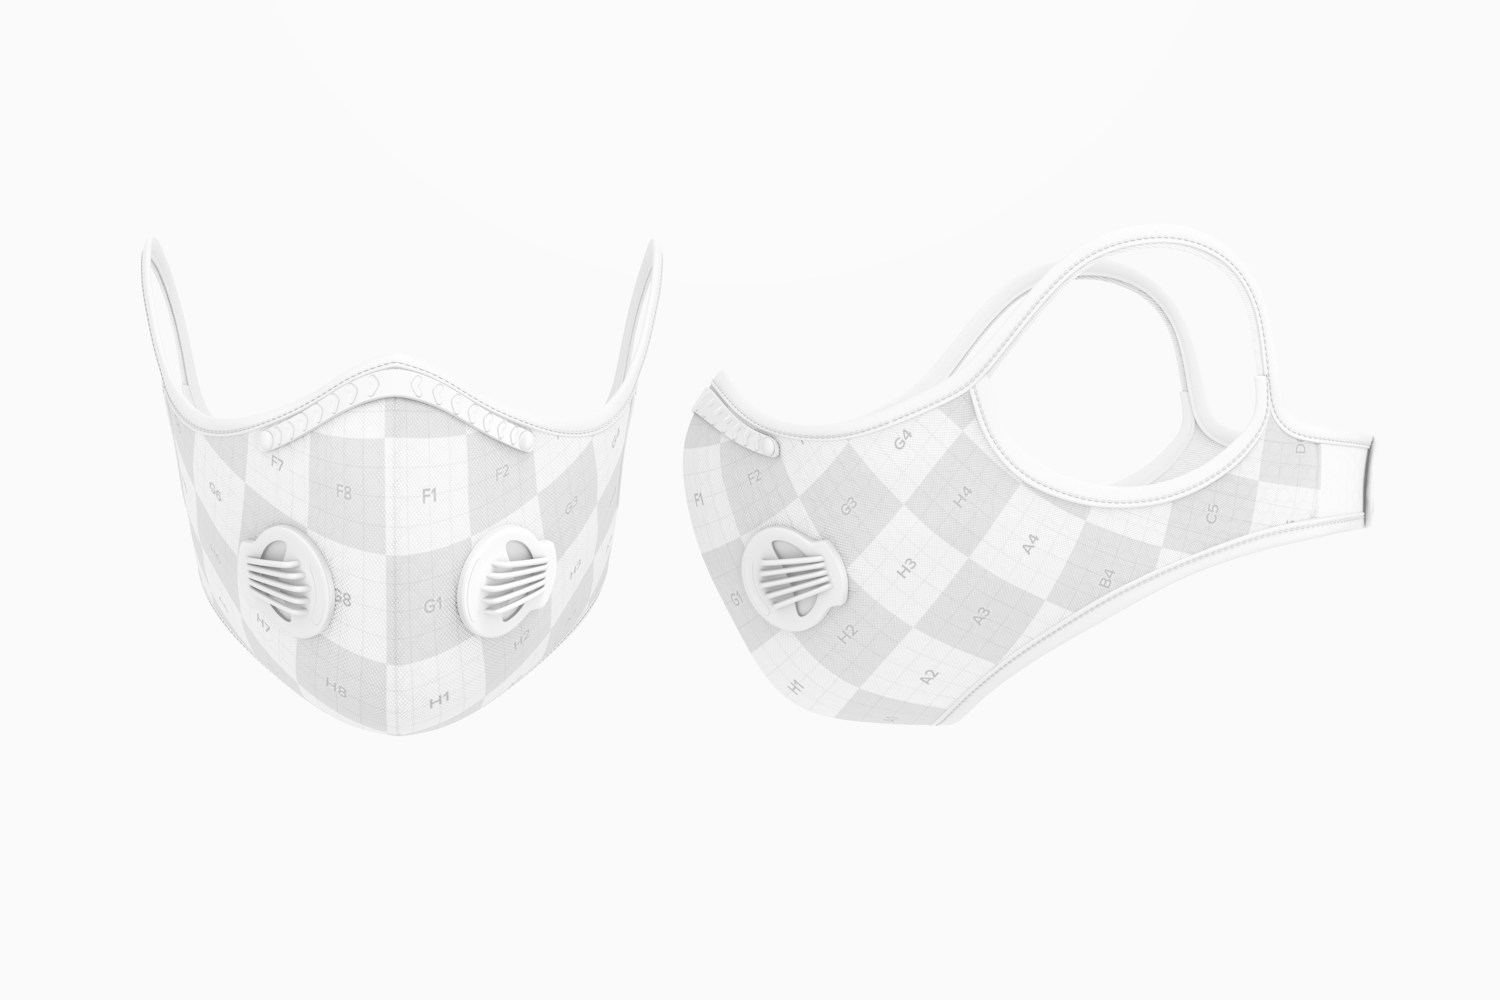 Reusable Mask with Filters Mockup, Front and Side View